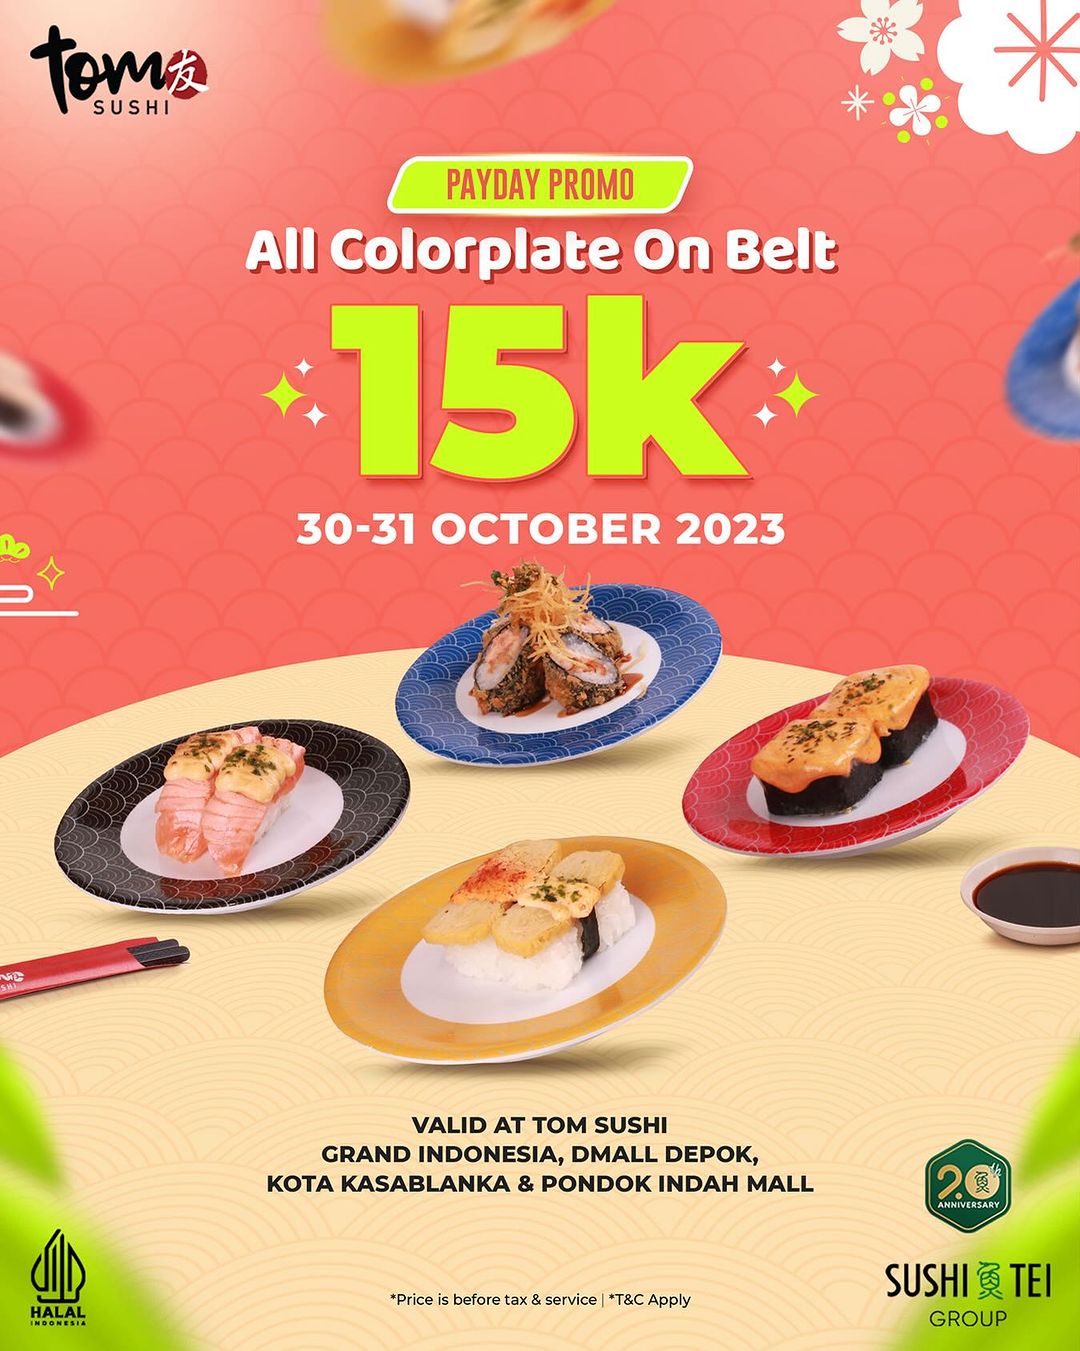 Promo TOM SUSHI PAYDAY – ALL COLORPLATE ON BELT Only 15K